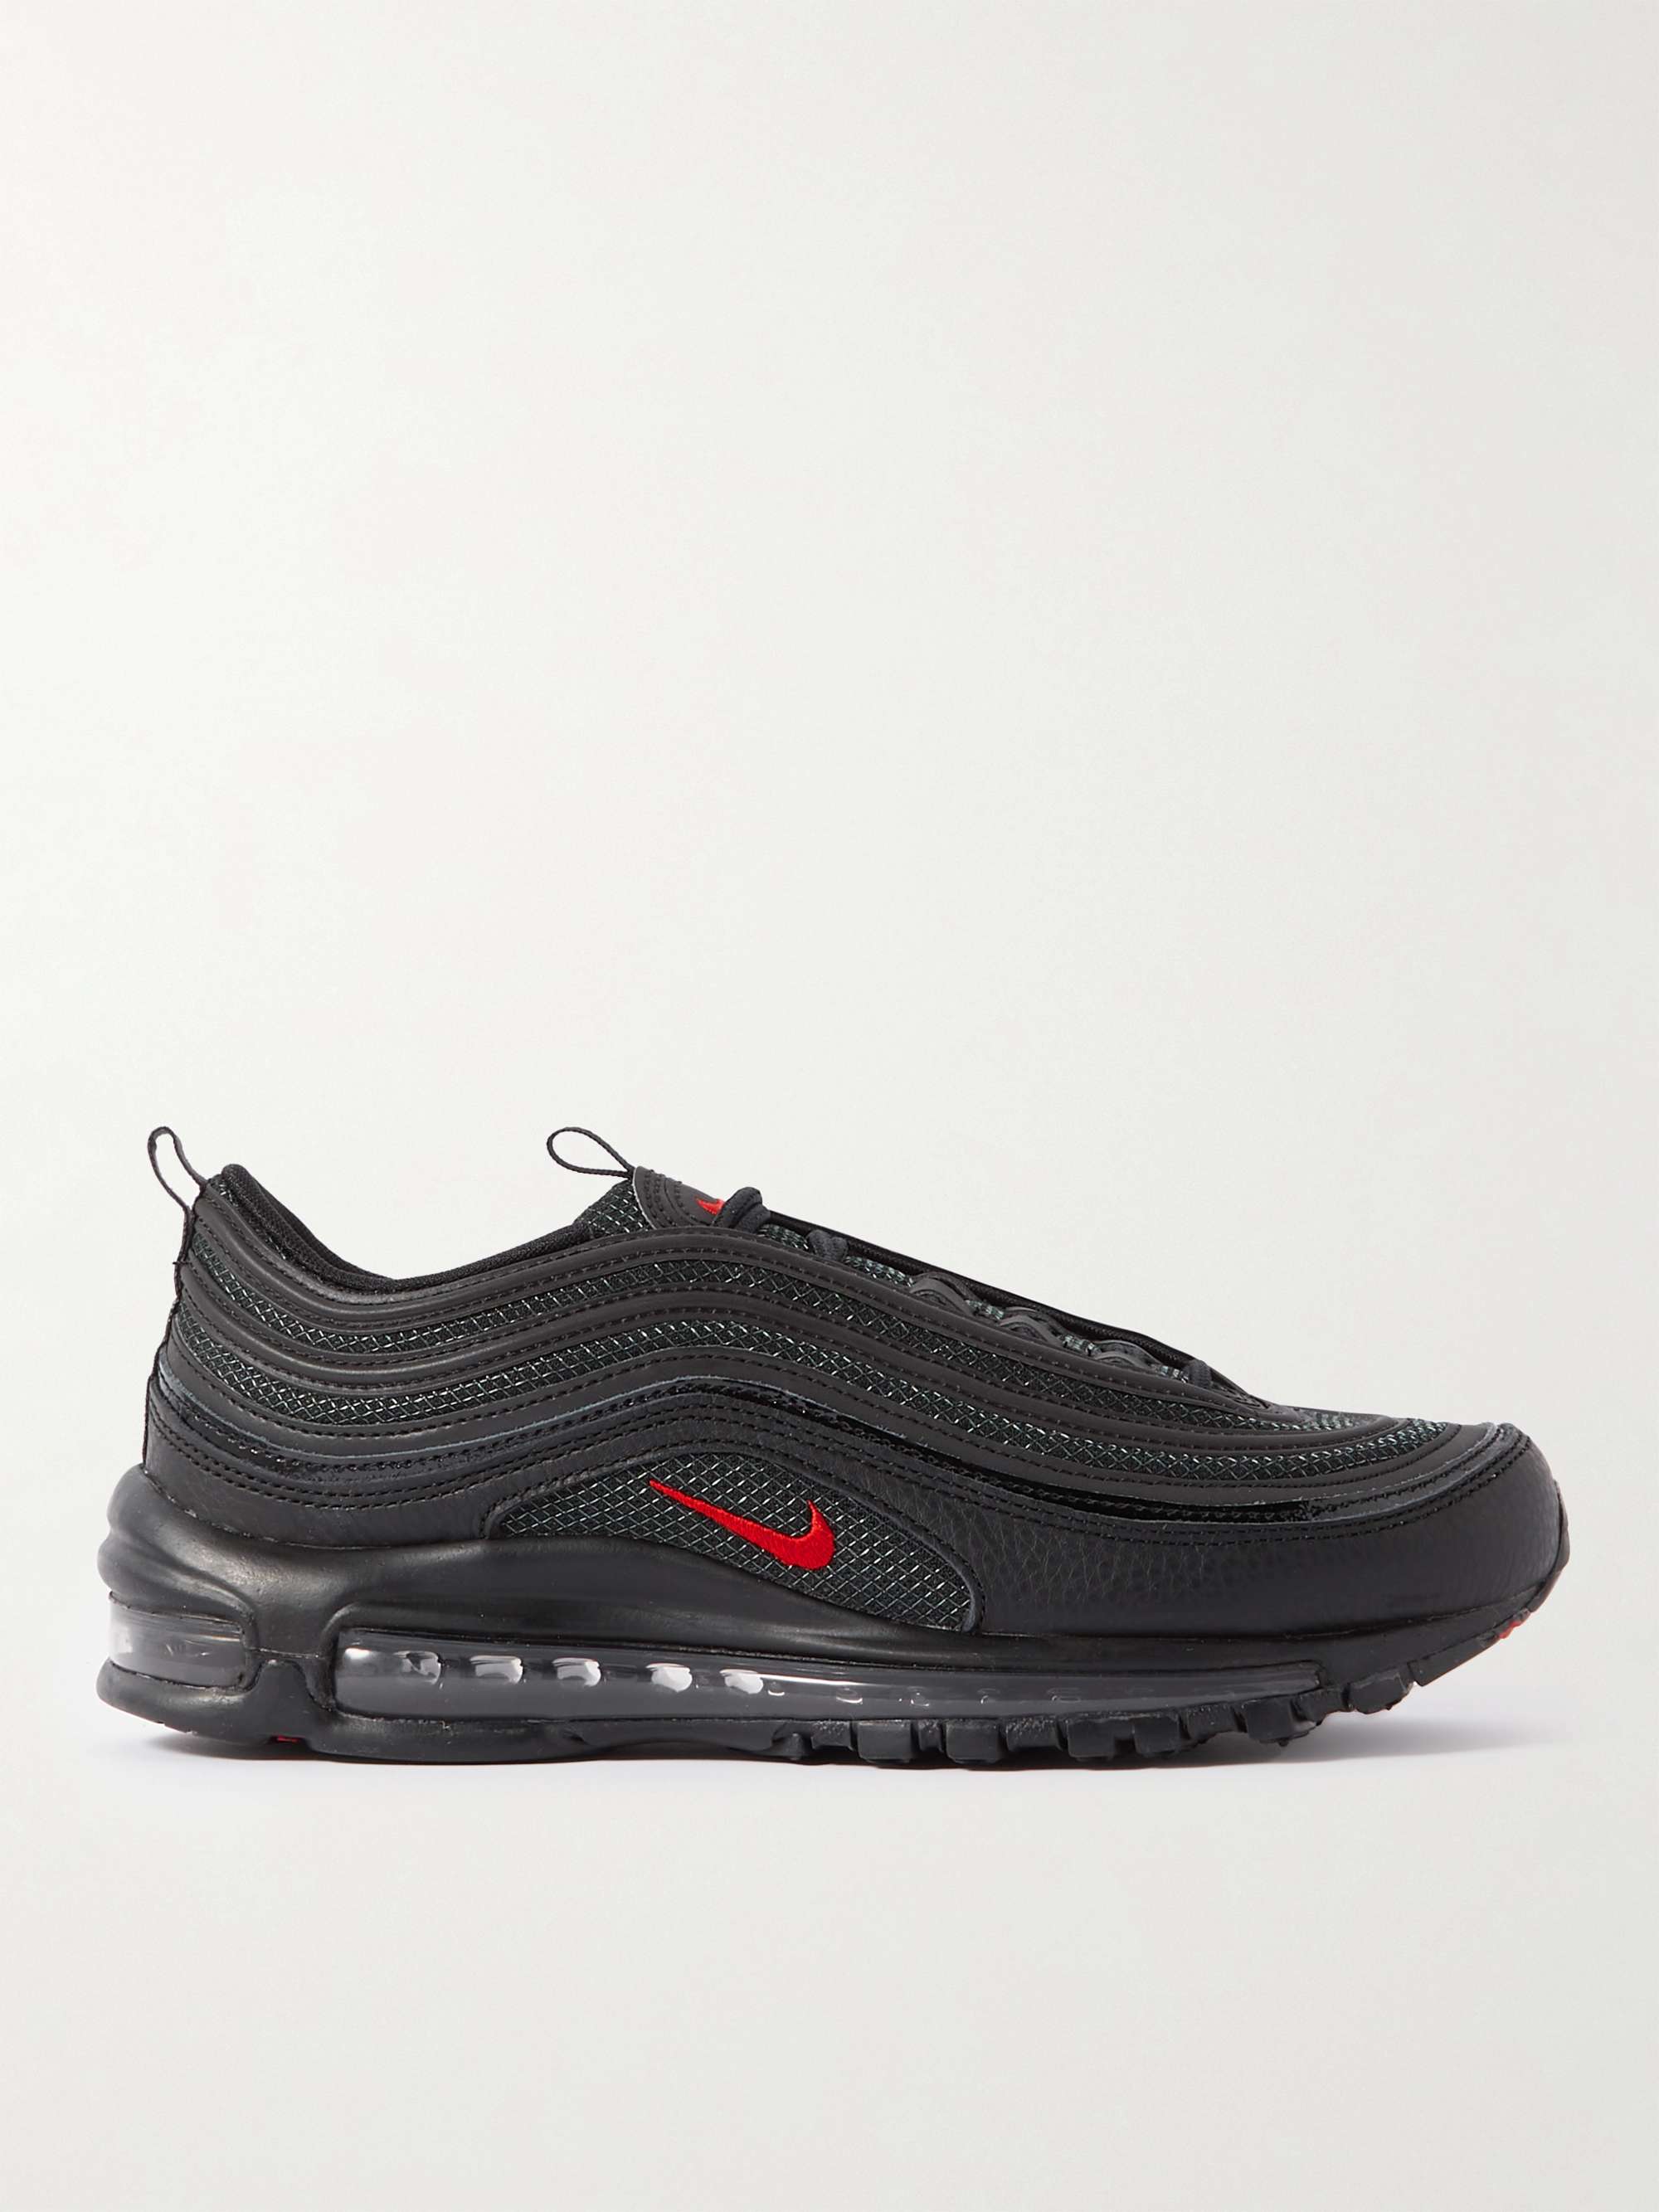 NIKE Air Max 97 Leather and Mesh Sneakers | MR PORTER